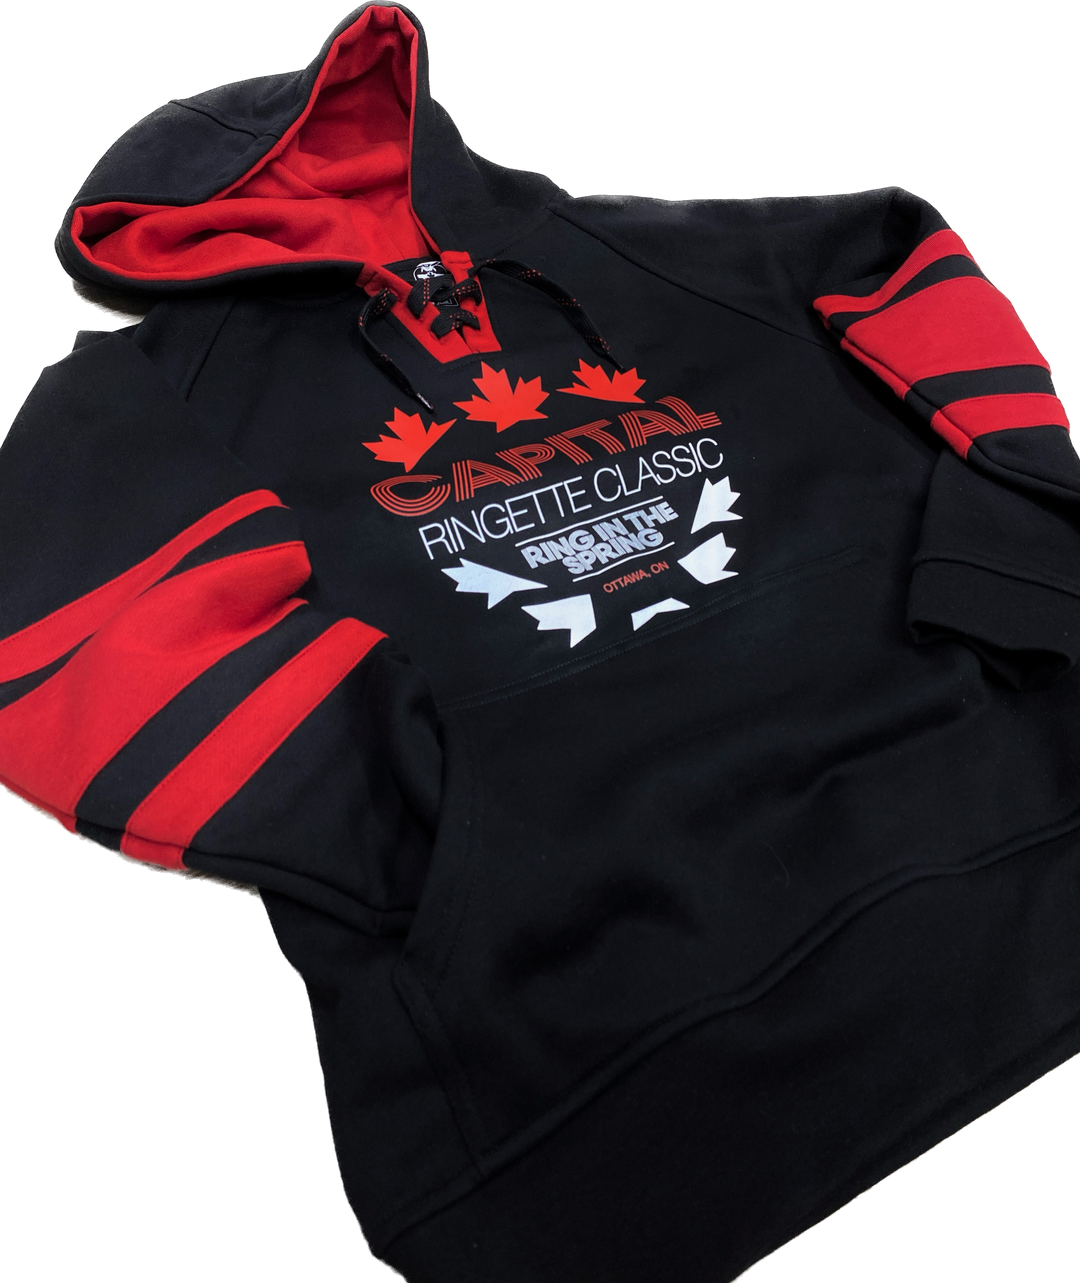 Capital Ringette Classic Skate Lace Hoodie-ADULT